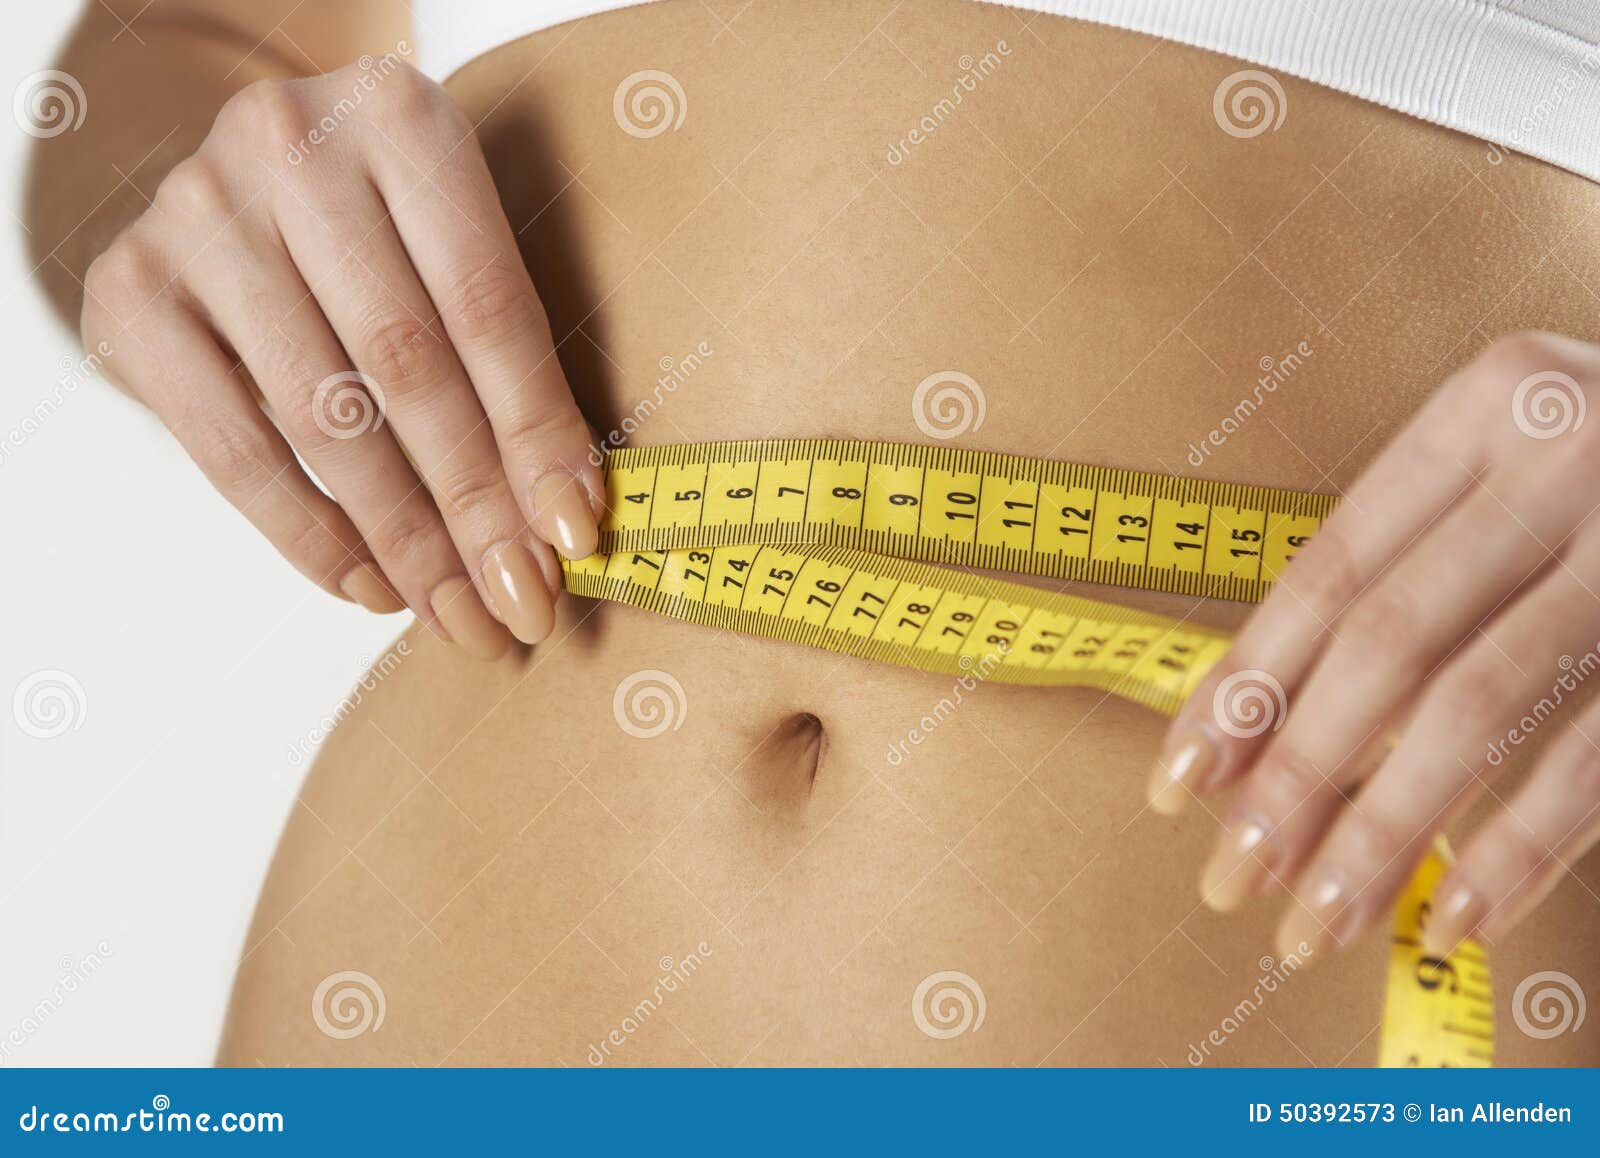 Photo of a Tape Measure on a Person's Waist · Free Stock Photo